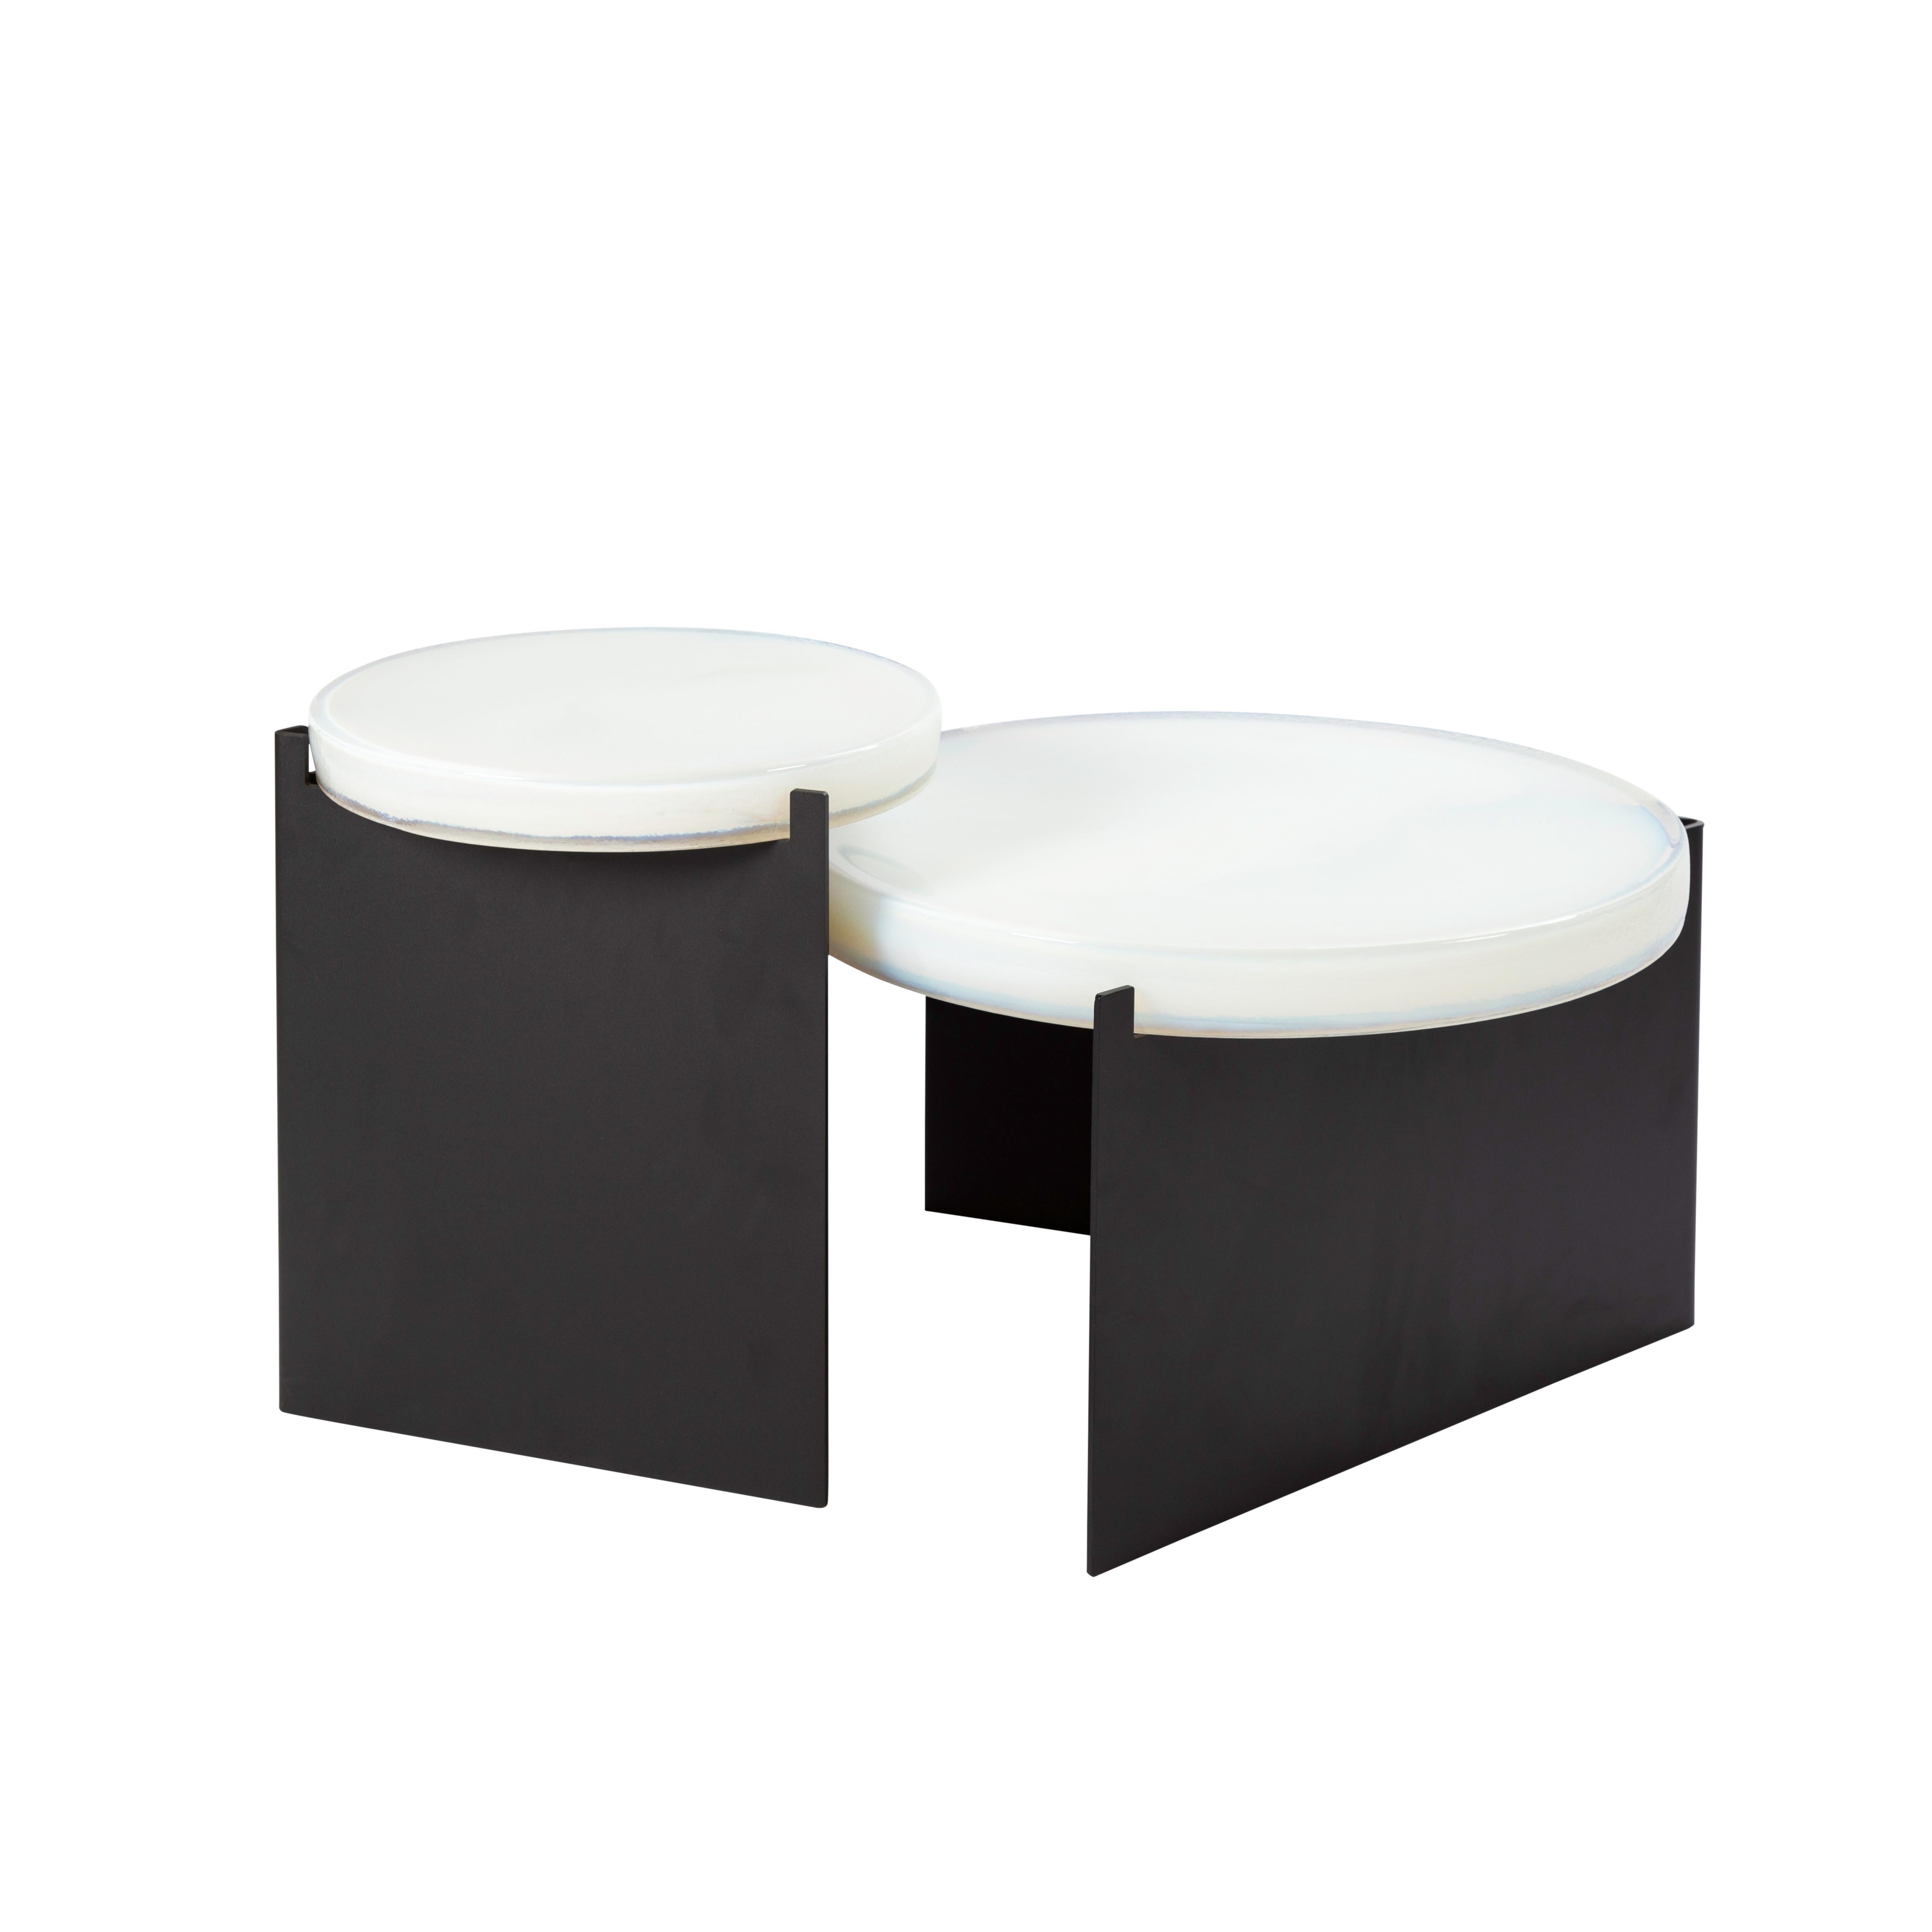 Set of 2 Alwa one tables by Pulpo
Dimensions: D56 x H35 cm // D38 x H 44 cm.
Materials: casted glass; powder coated steel.

Also available in different finishes. 

Normally, glass is regarded as being lightweight with sharp edges. In contrast,